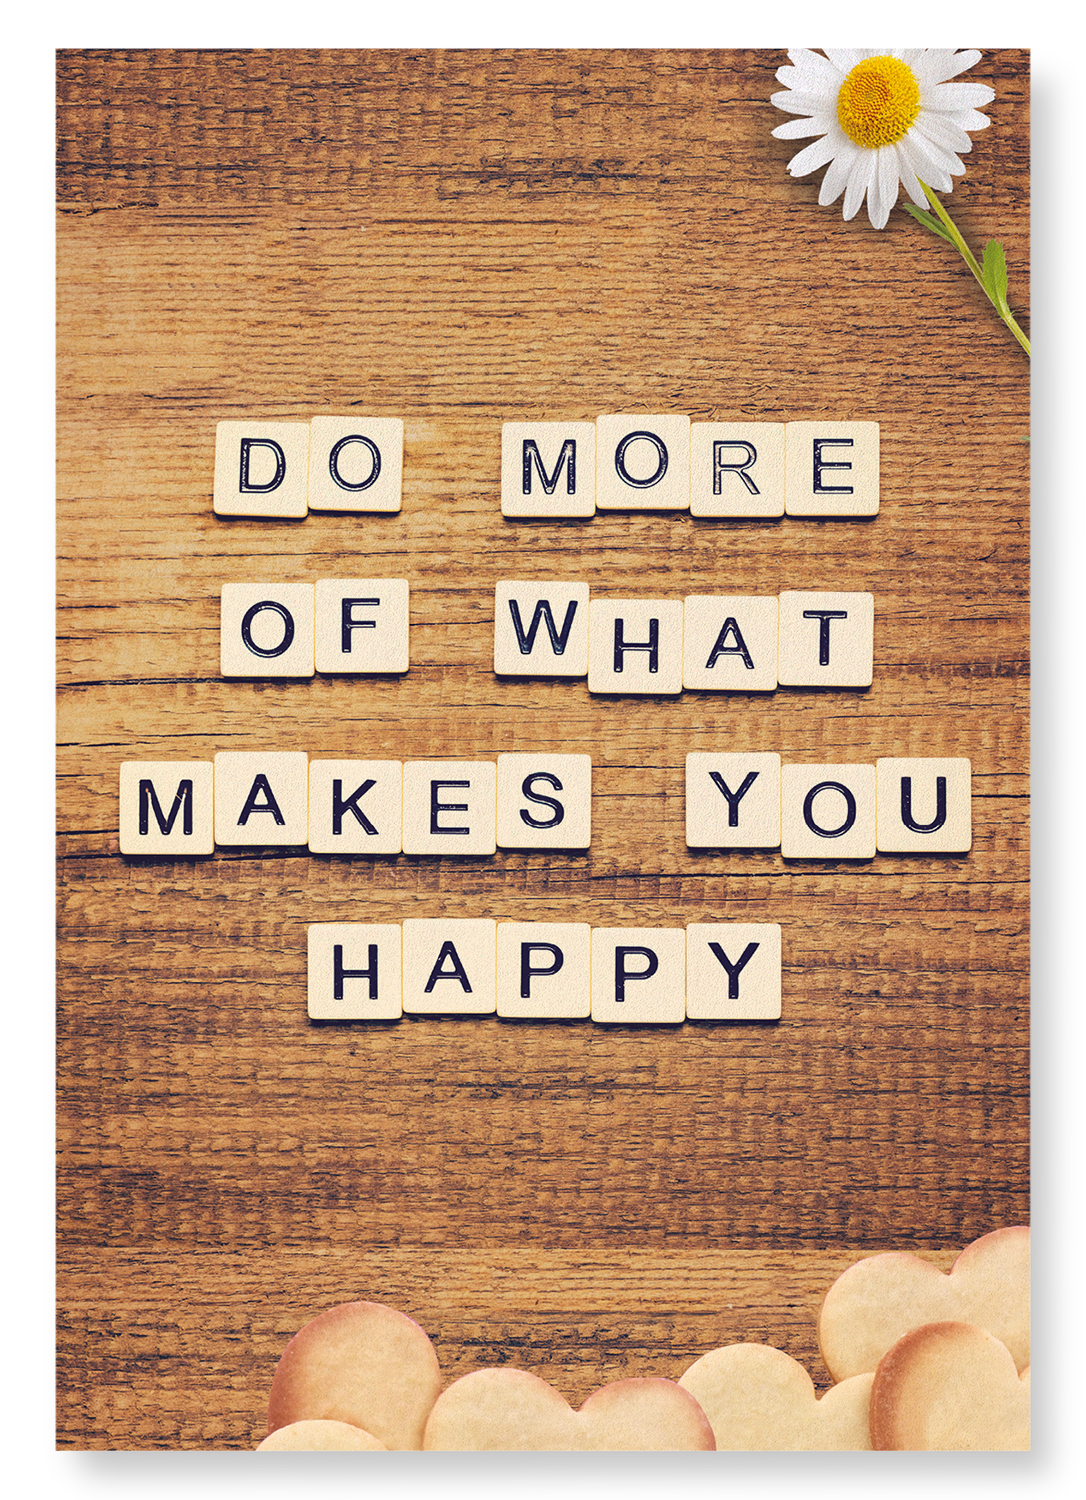 DO WHAT MAKES YOU HAPPY: Photo Art print